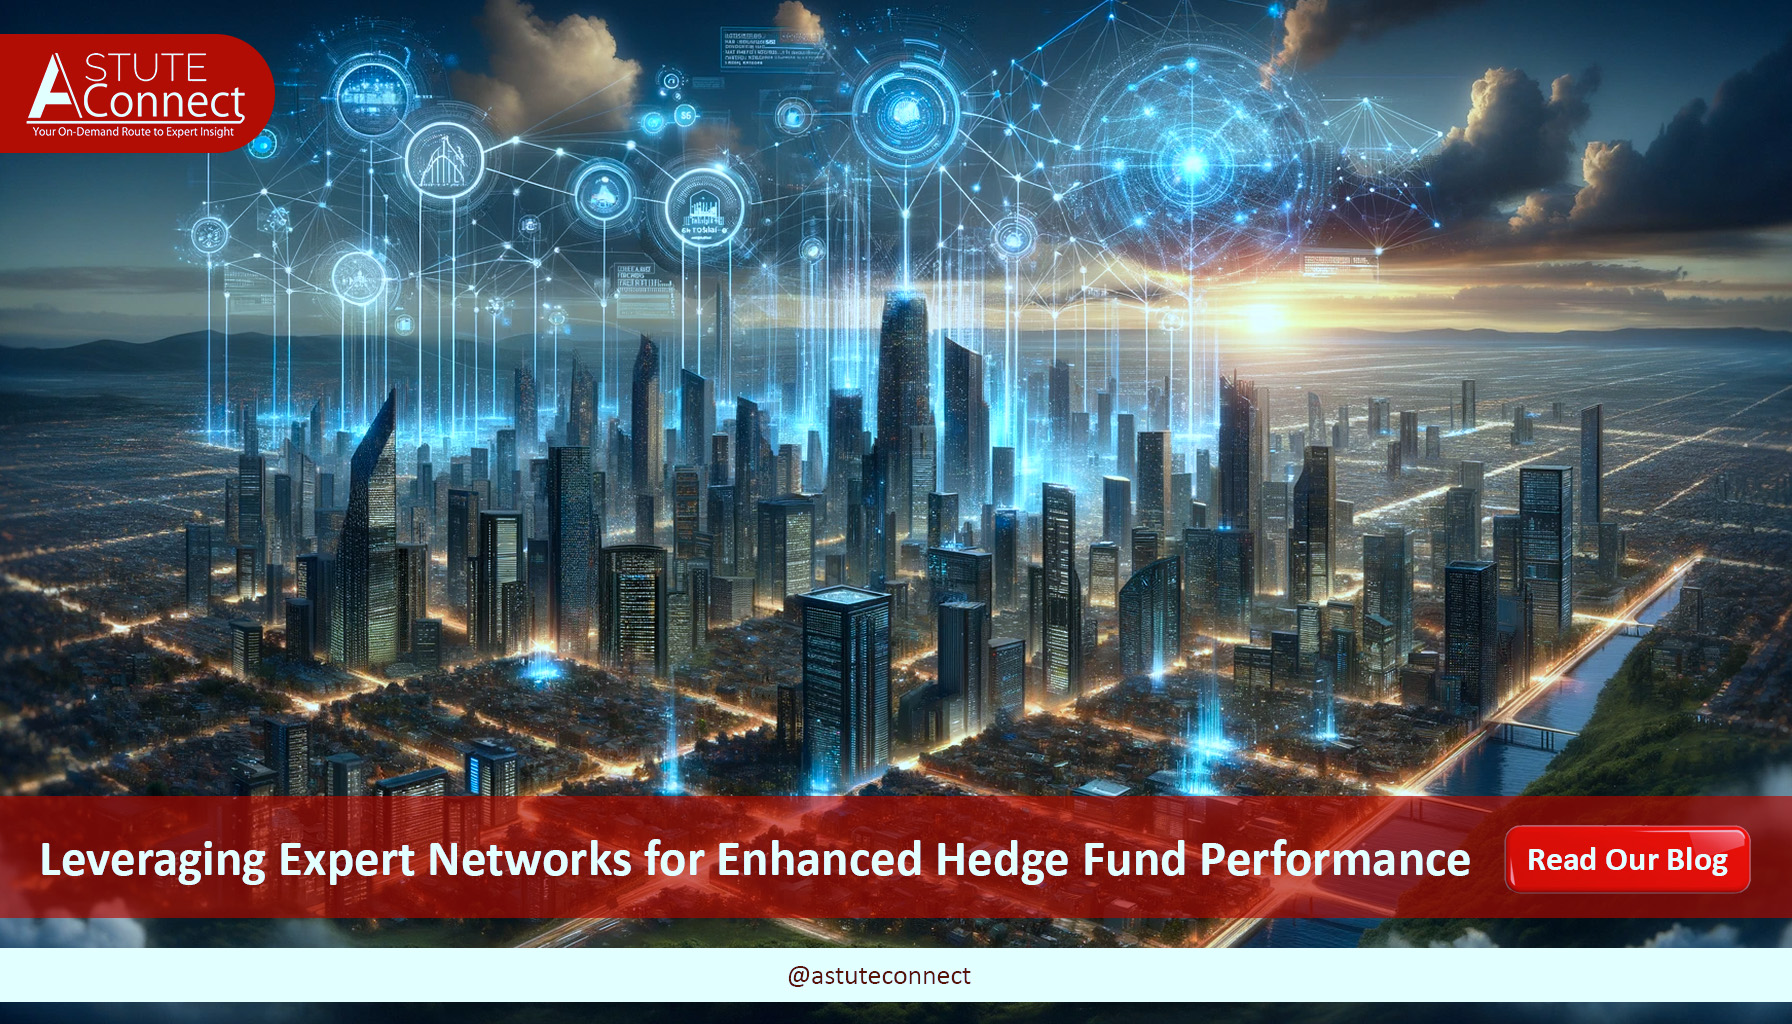 What role do expert networks play in boosting the performance of hedge funds?